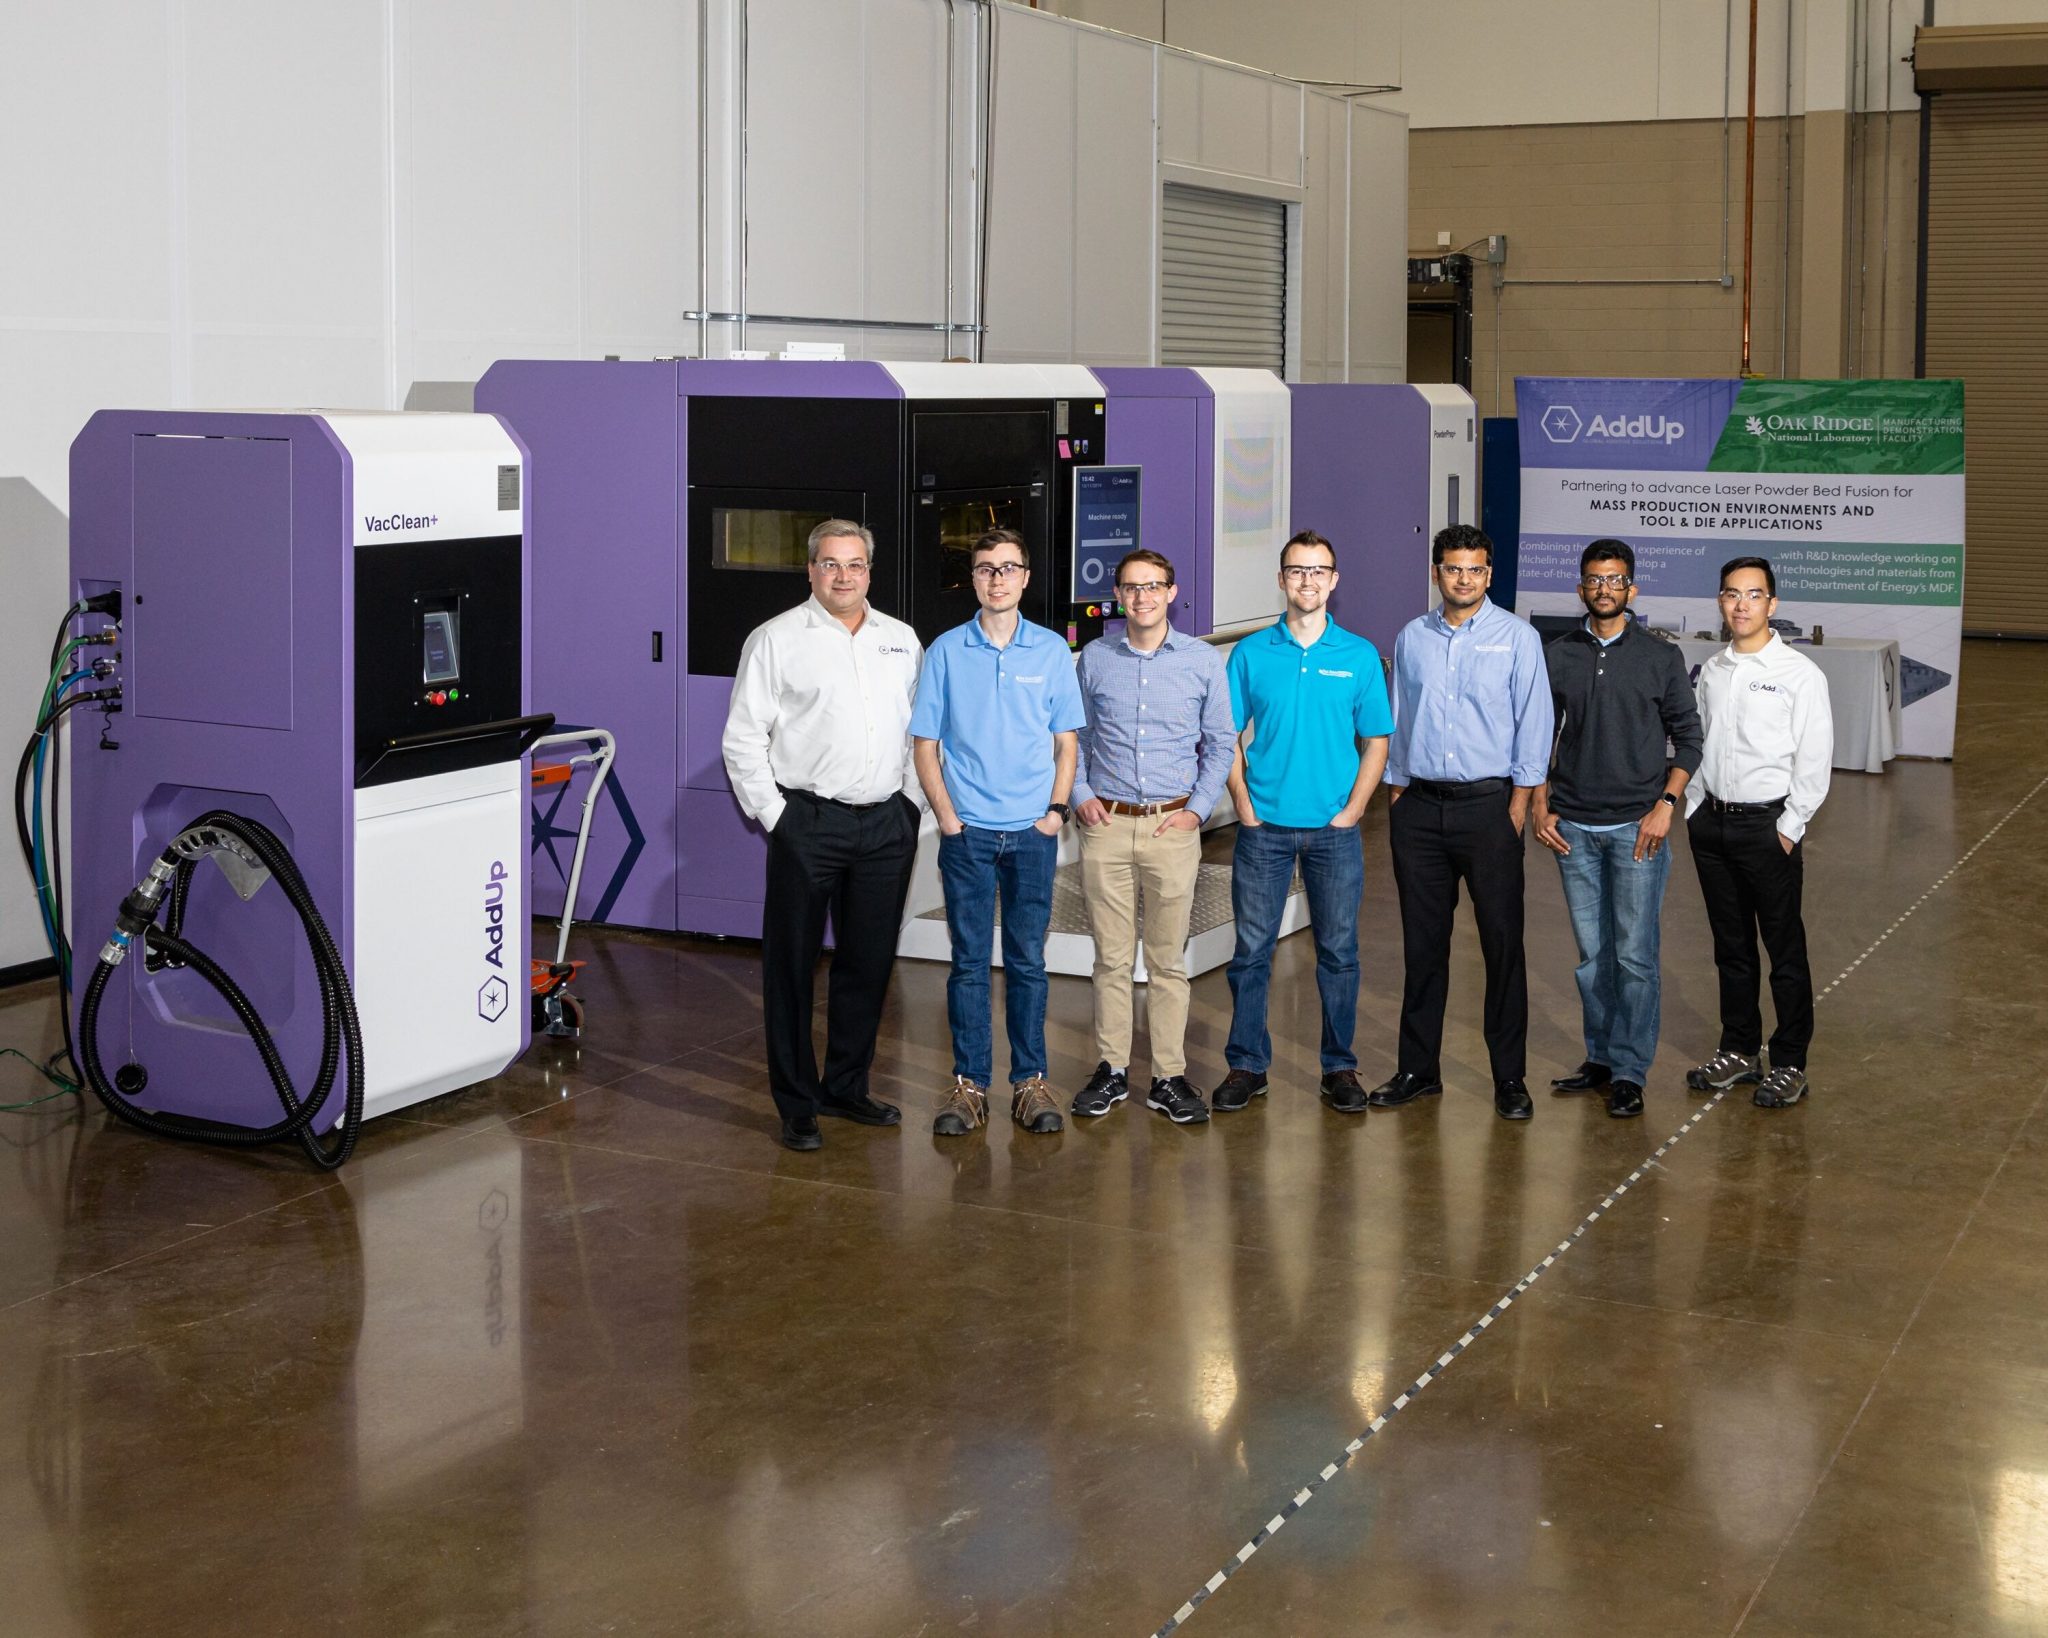 Members of the Oak Ridge National Laboratories and AddUp team collaborate to target the advancement of materials processes for metal additive manufacturing tooling applications. Photo via AddUp/ORNL.